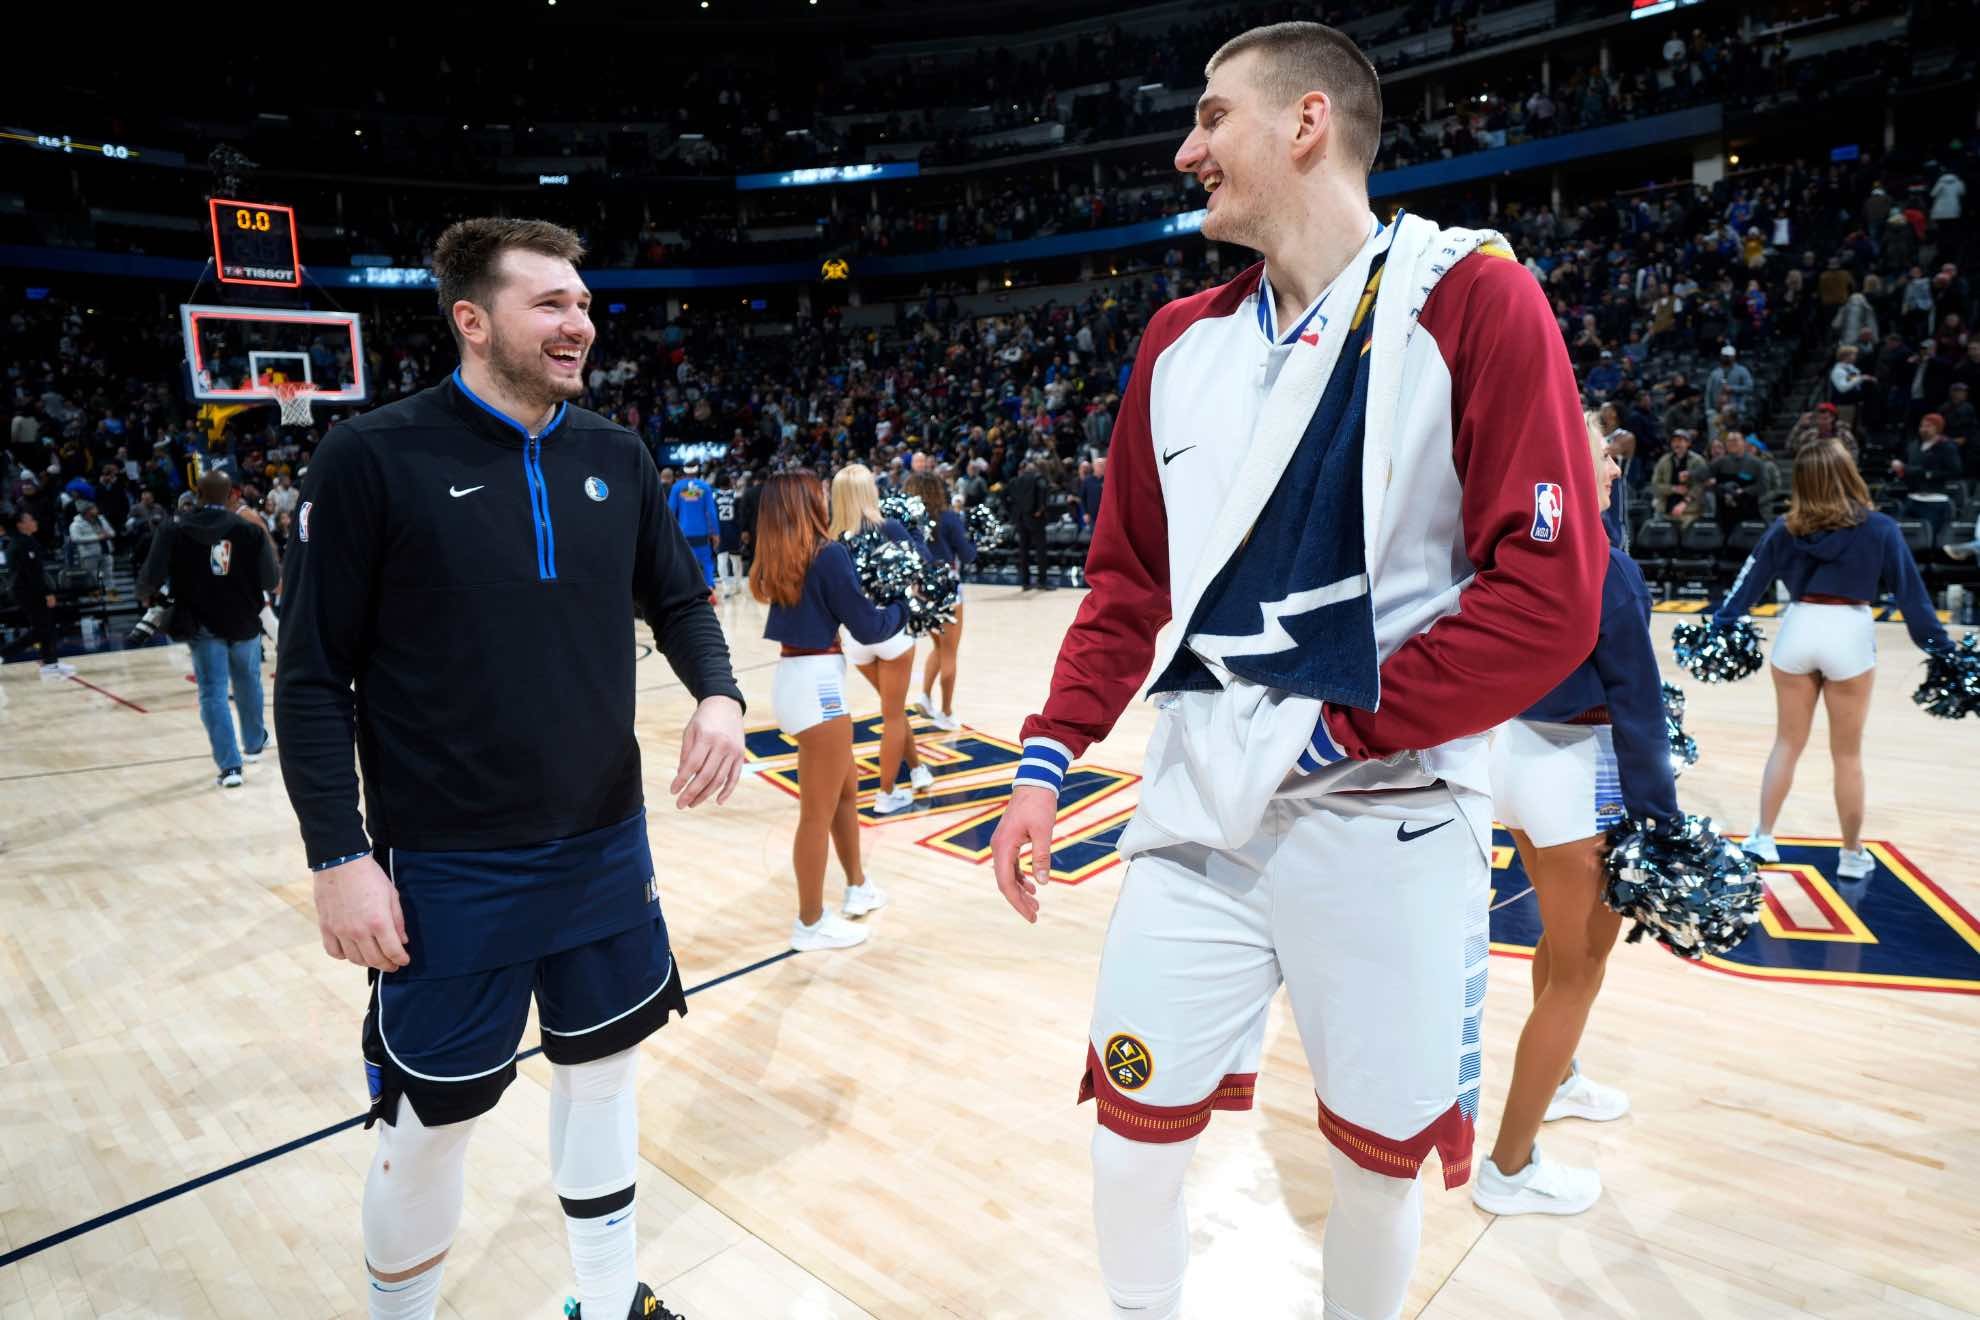 Nikola Jokic tested the limits of his playful relationship with Luka Doncic